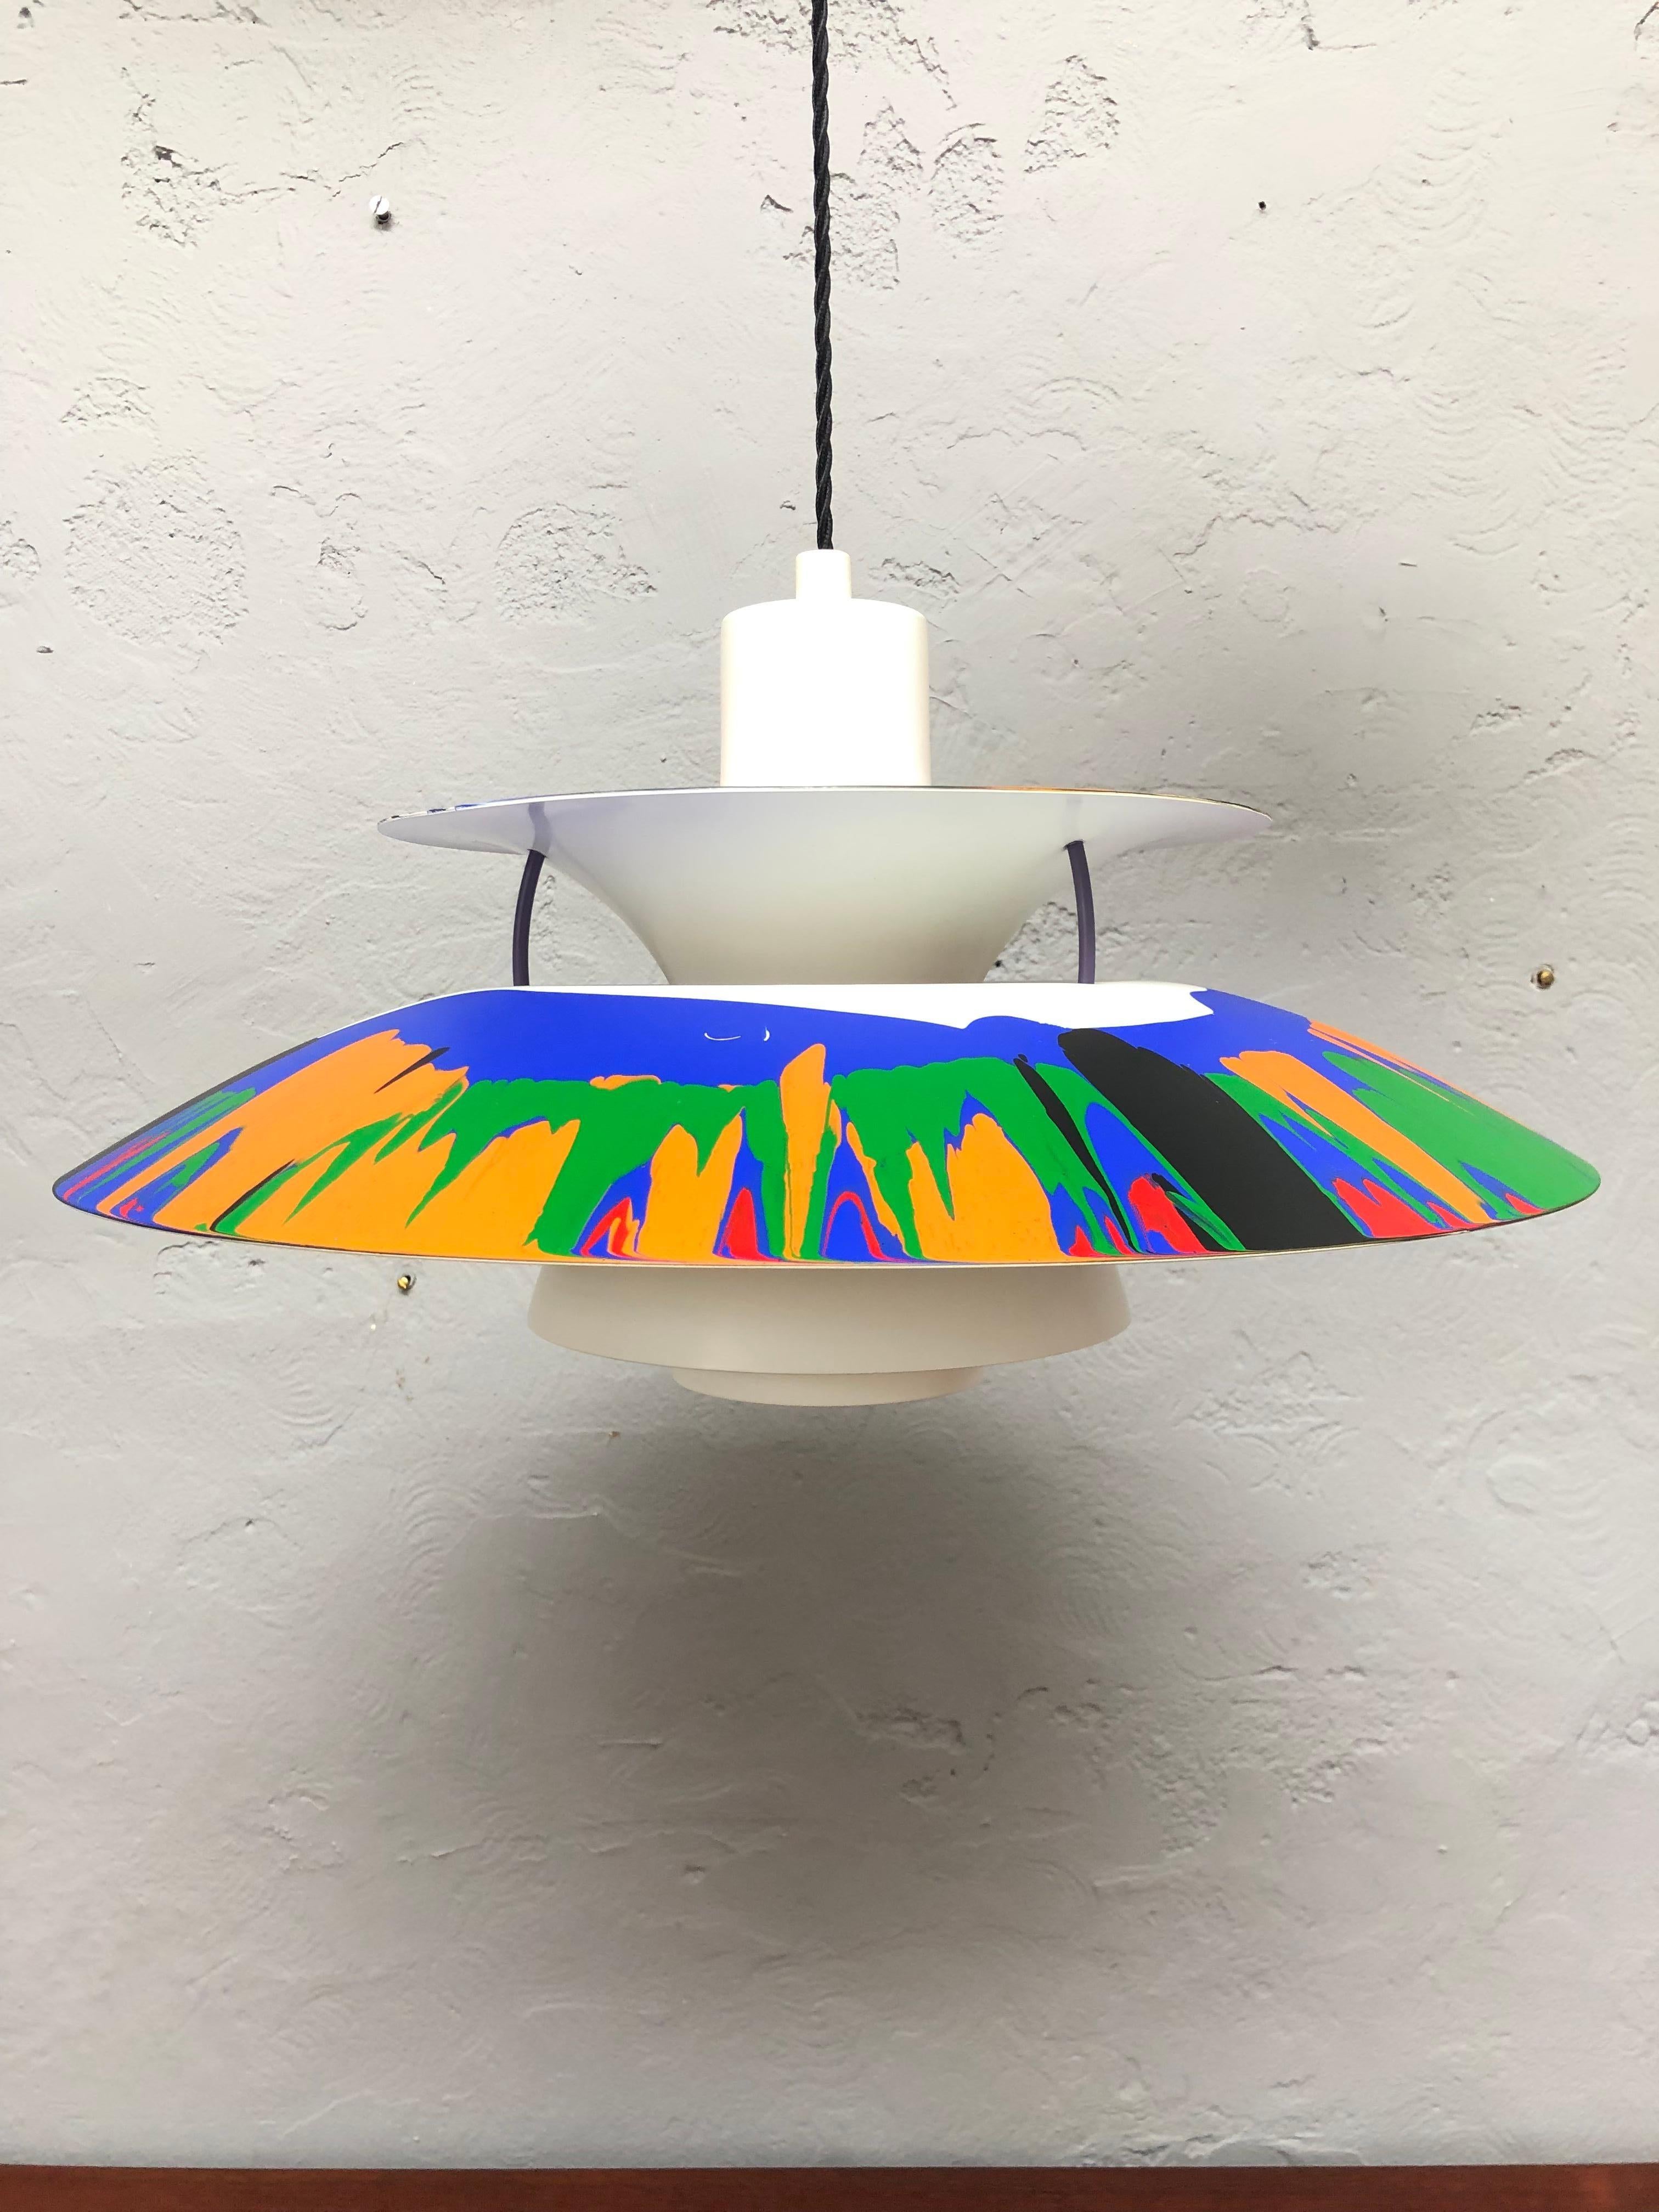 Iconic Vintage PH5 chandelier by Poul Henningsen for Louis Poulsen of Denmark from the 1990s with abstract art work by G61.
Entitled “ Migration” 
The art work is acrylic paint with a clear coat finish on top. 
All types of abstract art share a